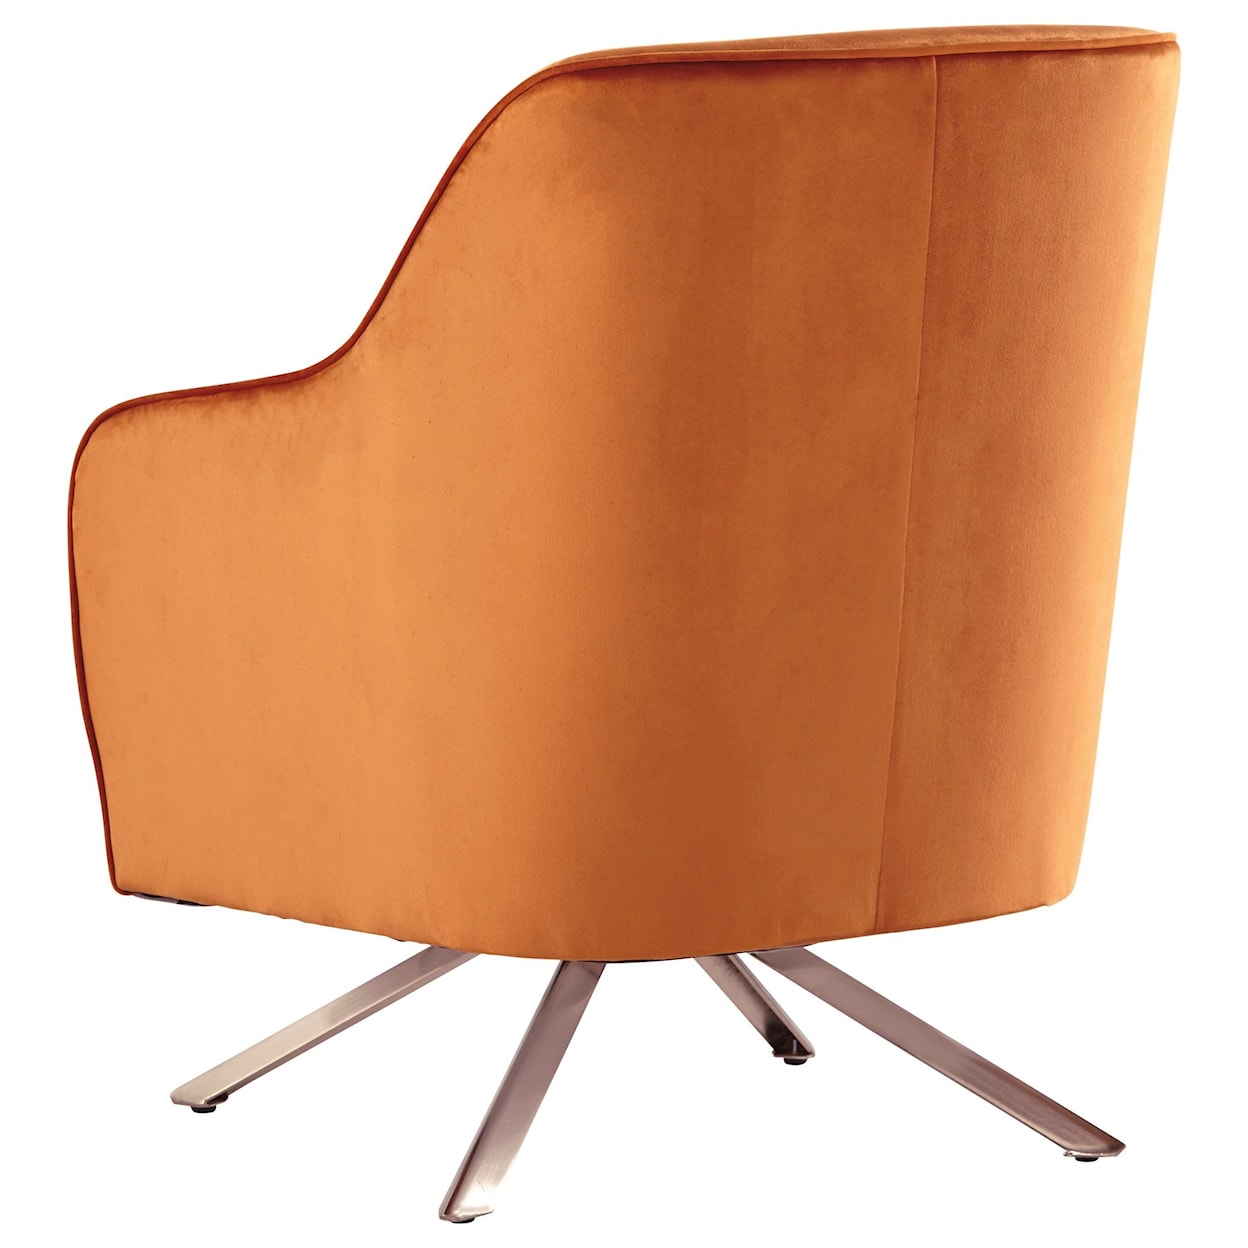 Signature Design by Ashley Hangar Accent Chair